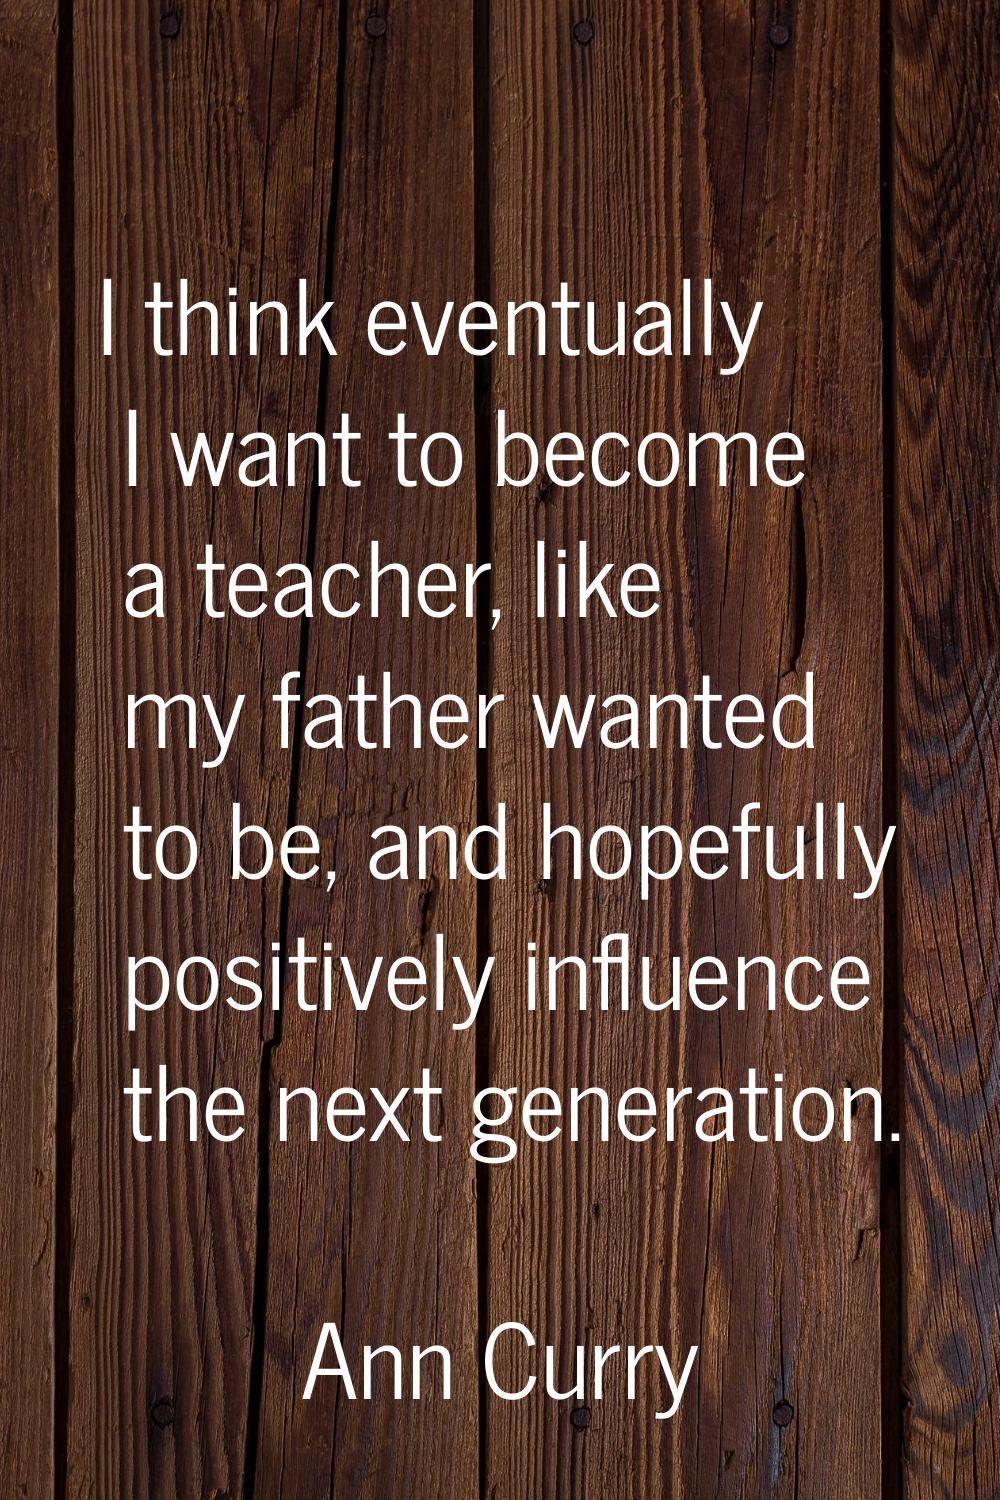 I think eventually I want to become a teacher, like my father wanted to be, and hopefully positivel